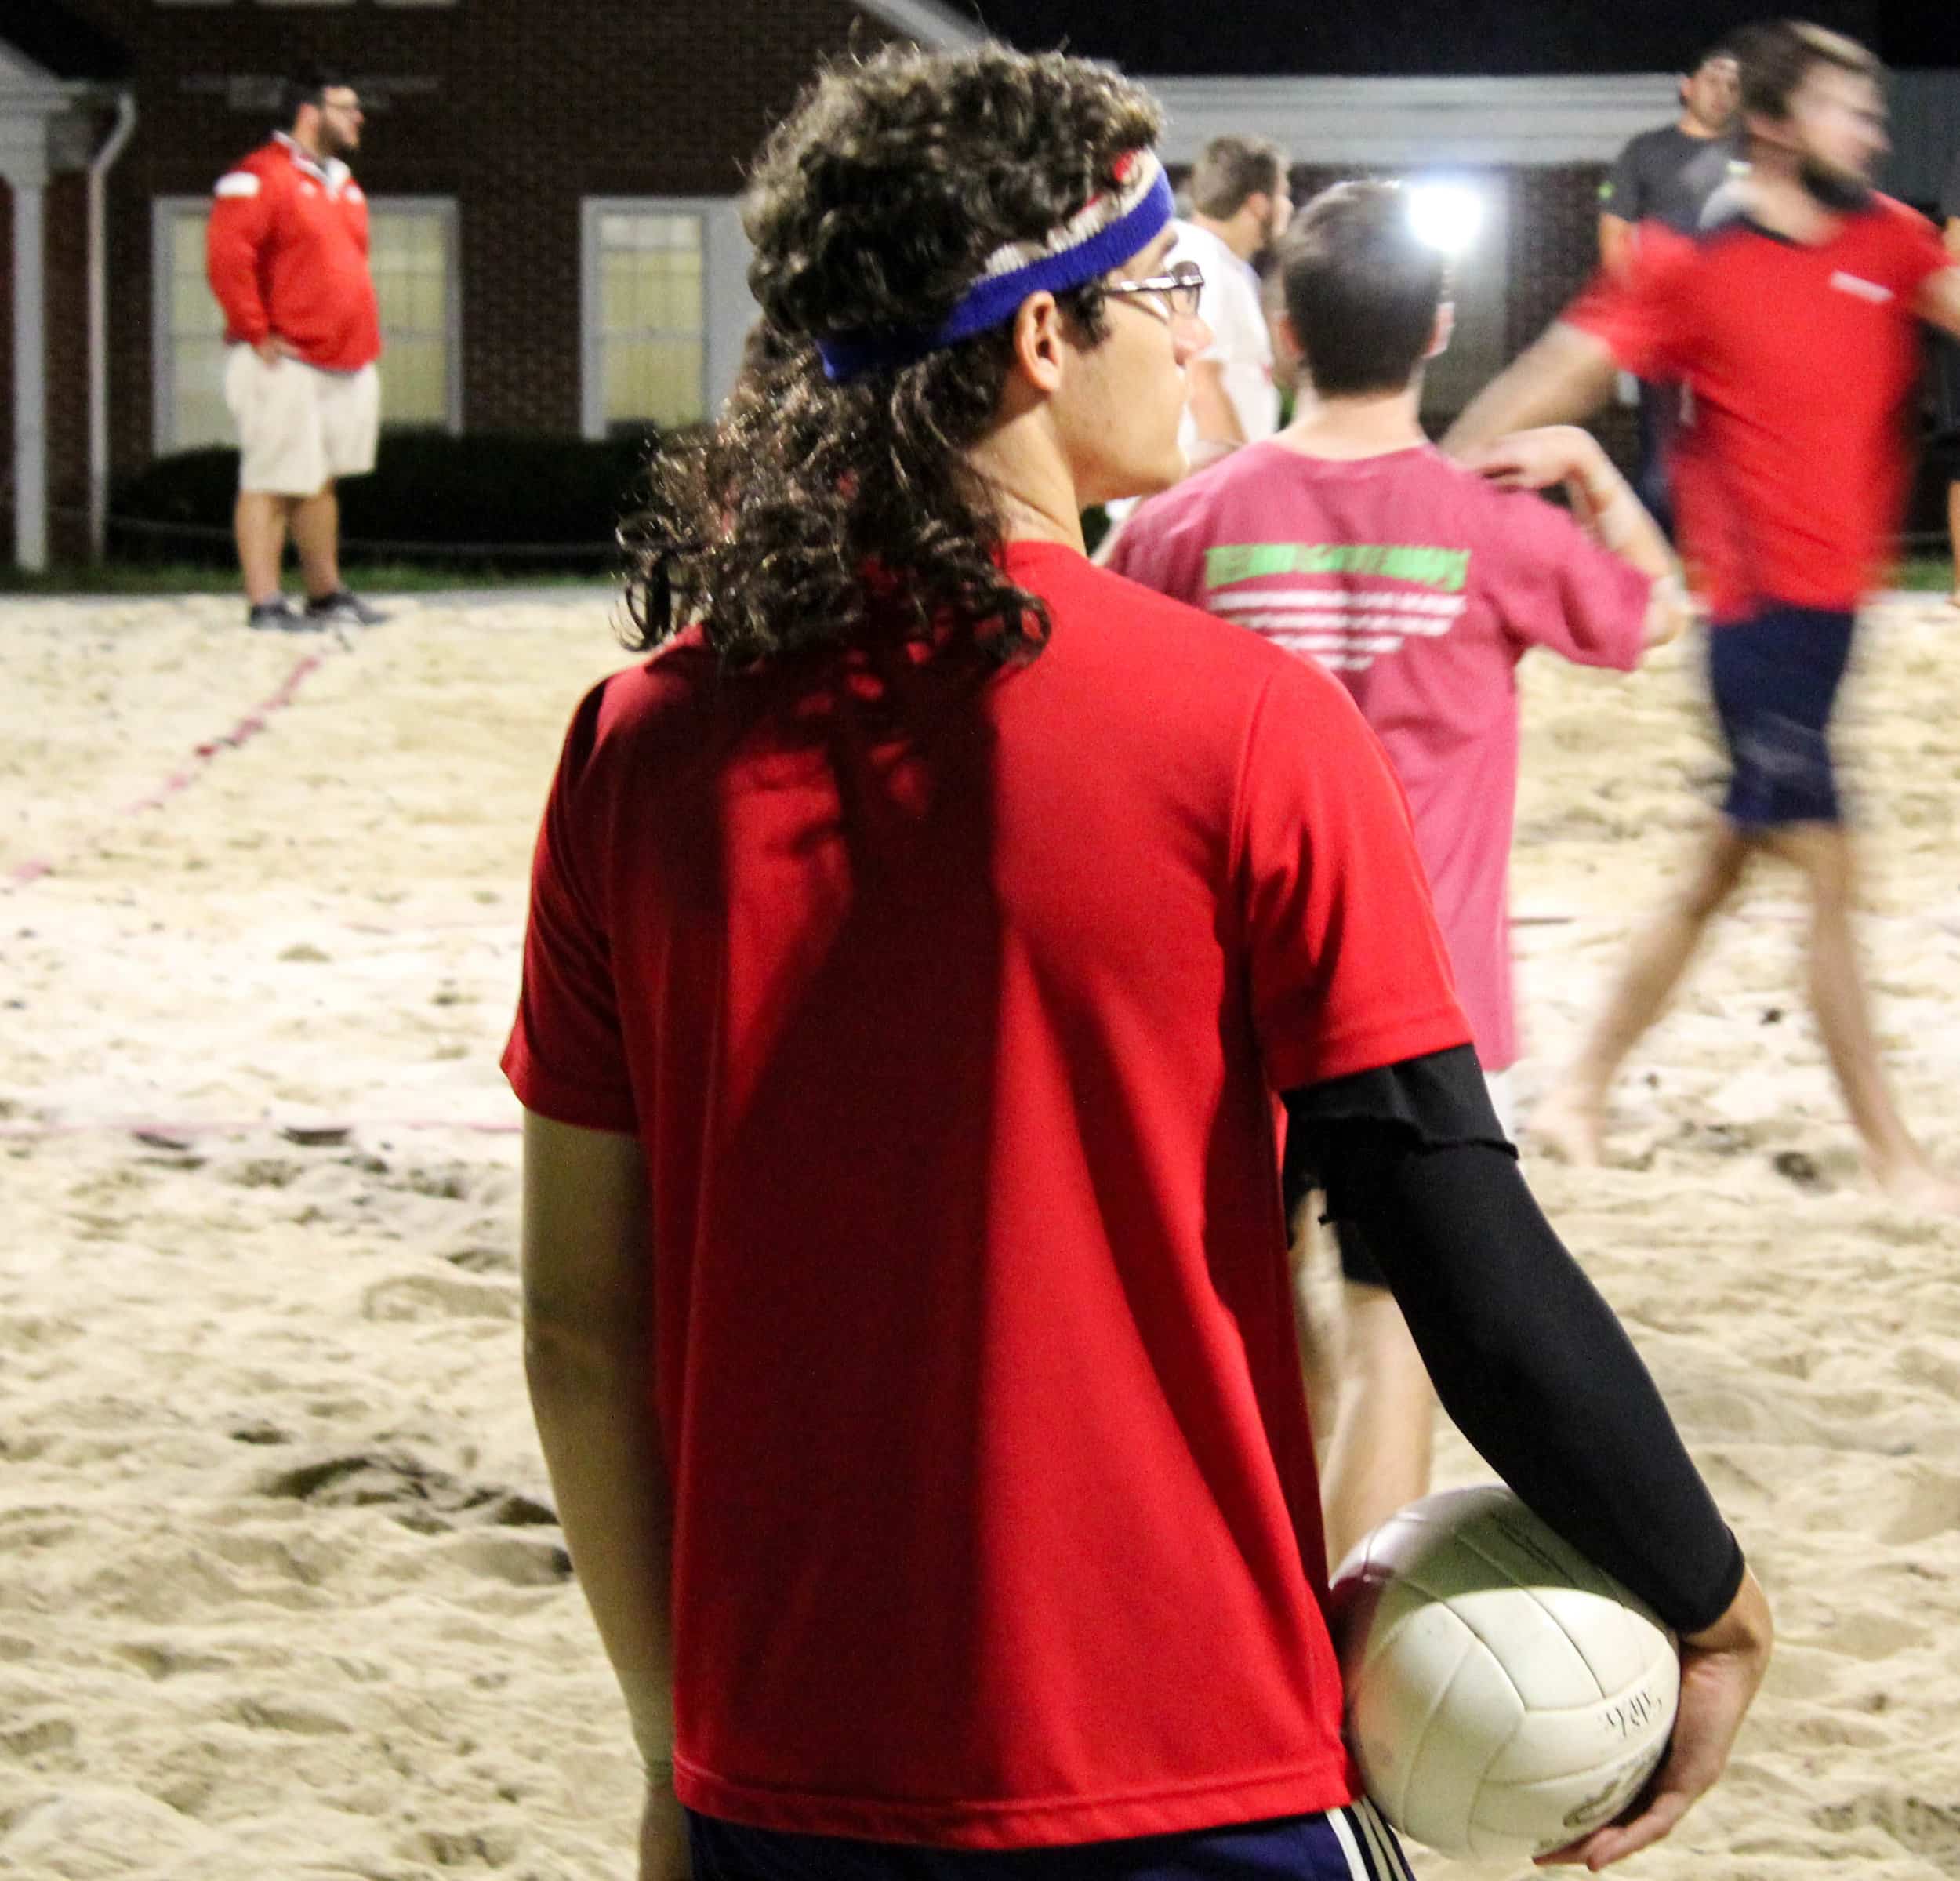 Members of the teams wore matching colors to show their support for their team. One player even wore a fake mullet to show his enthusiasm and team spirit.